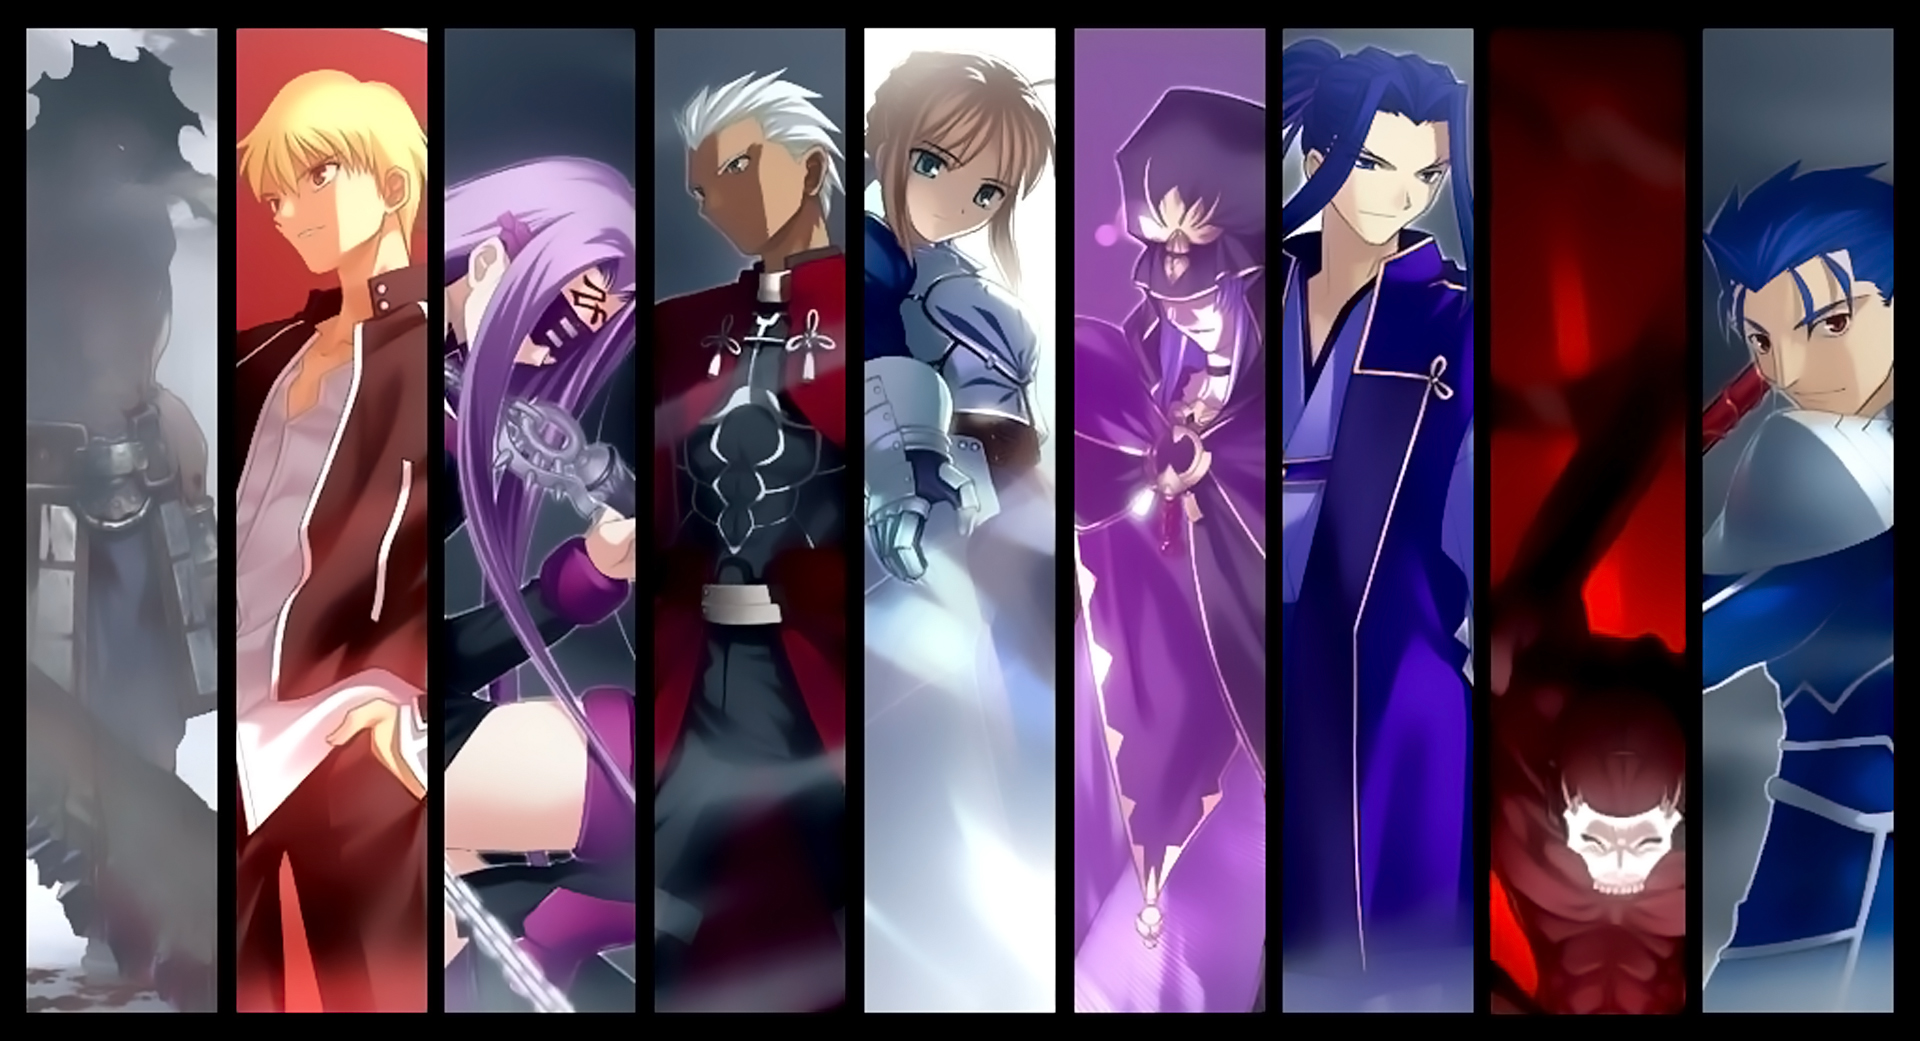 Fate/stay night character lineup featuring Gilgamesh, Saber, Caster, Lancer, Berserker, Rider, Assassin, and Archer